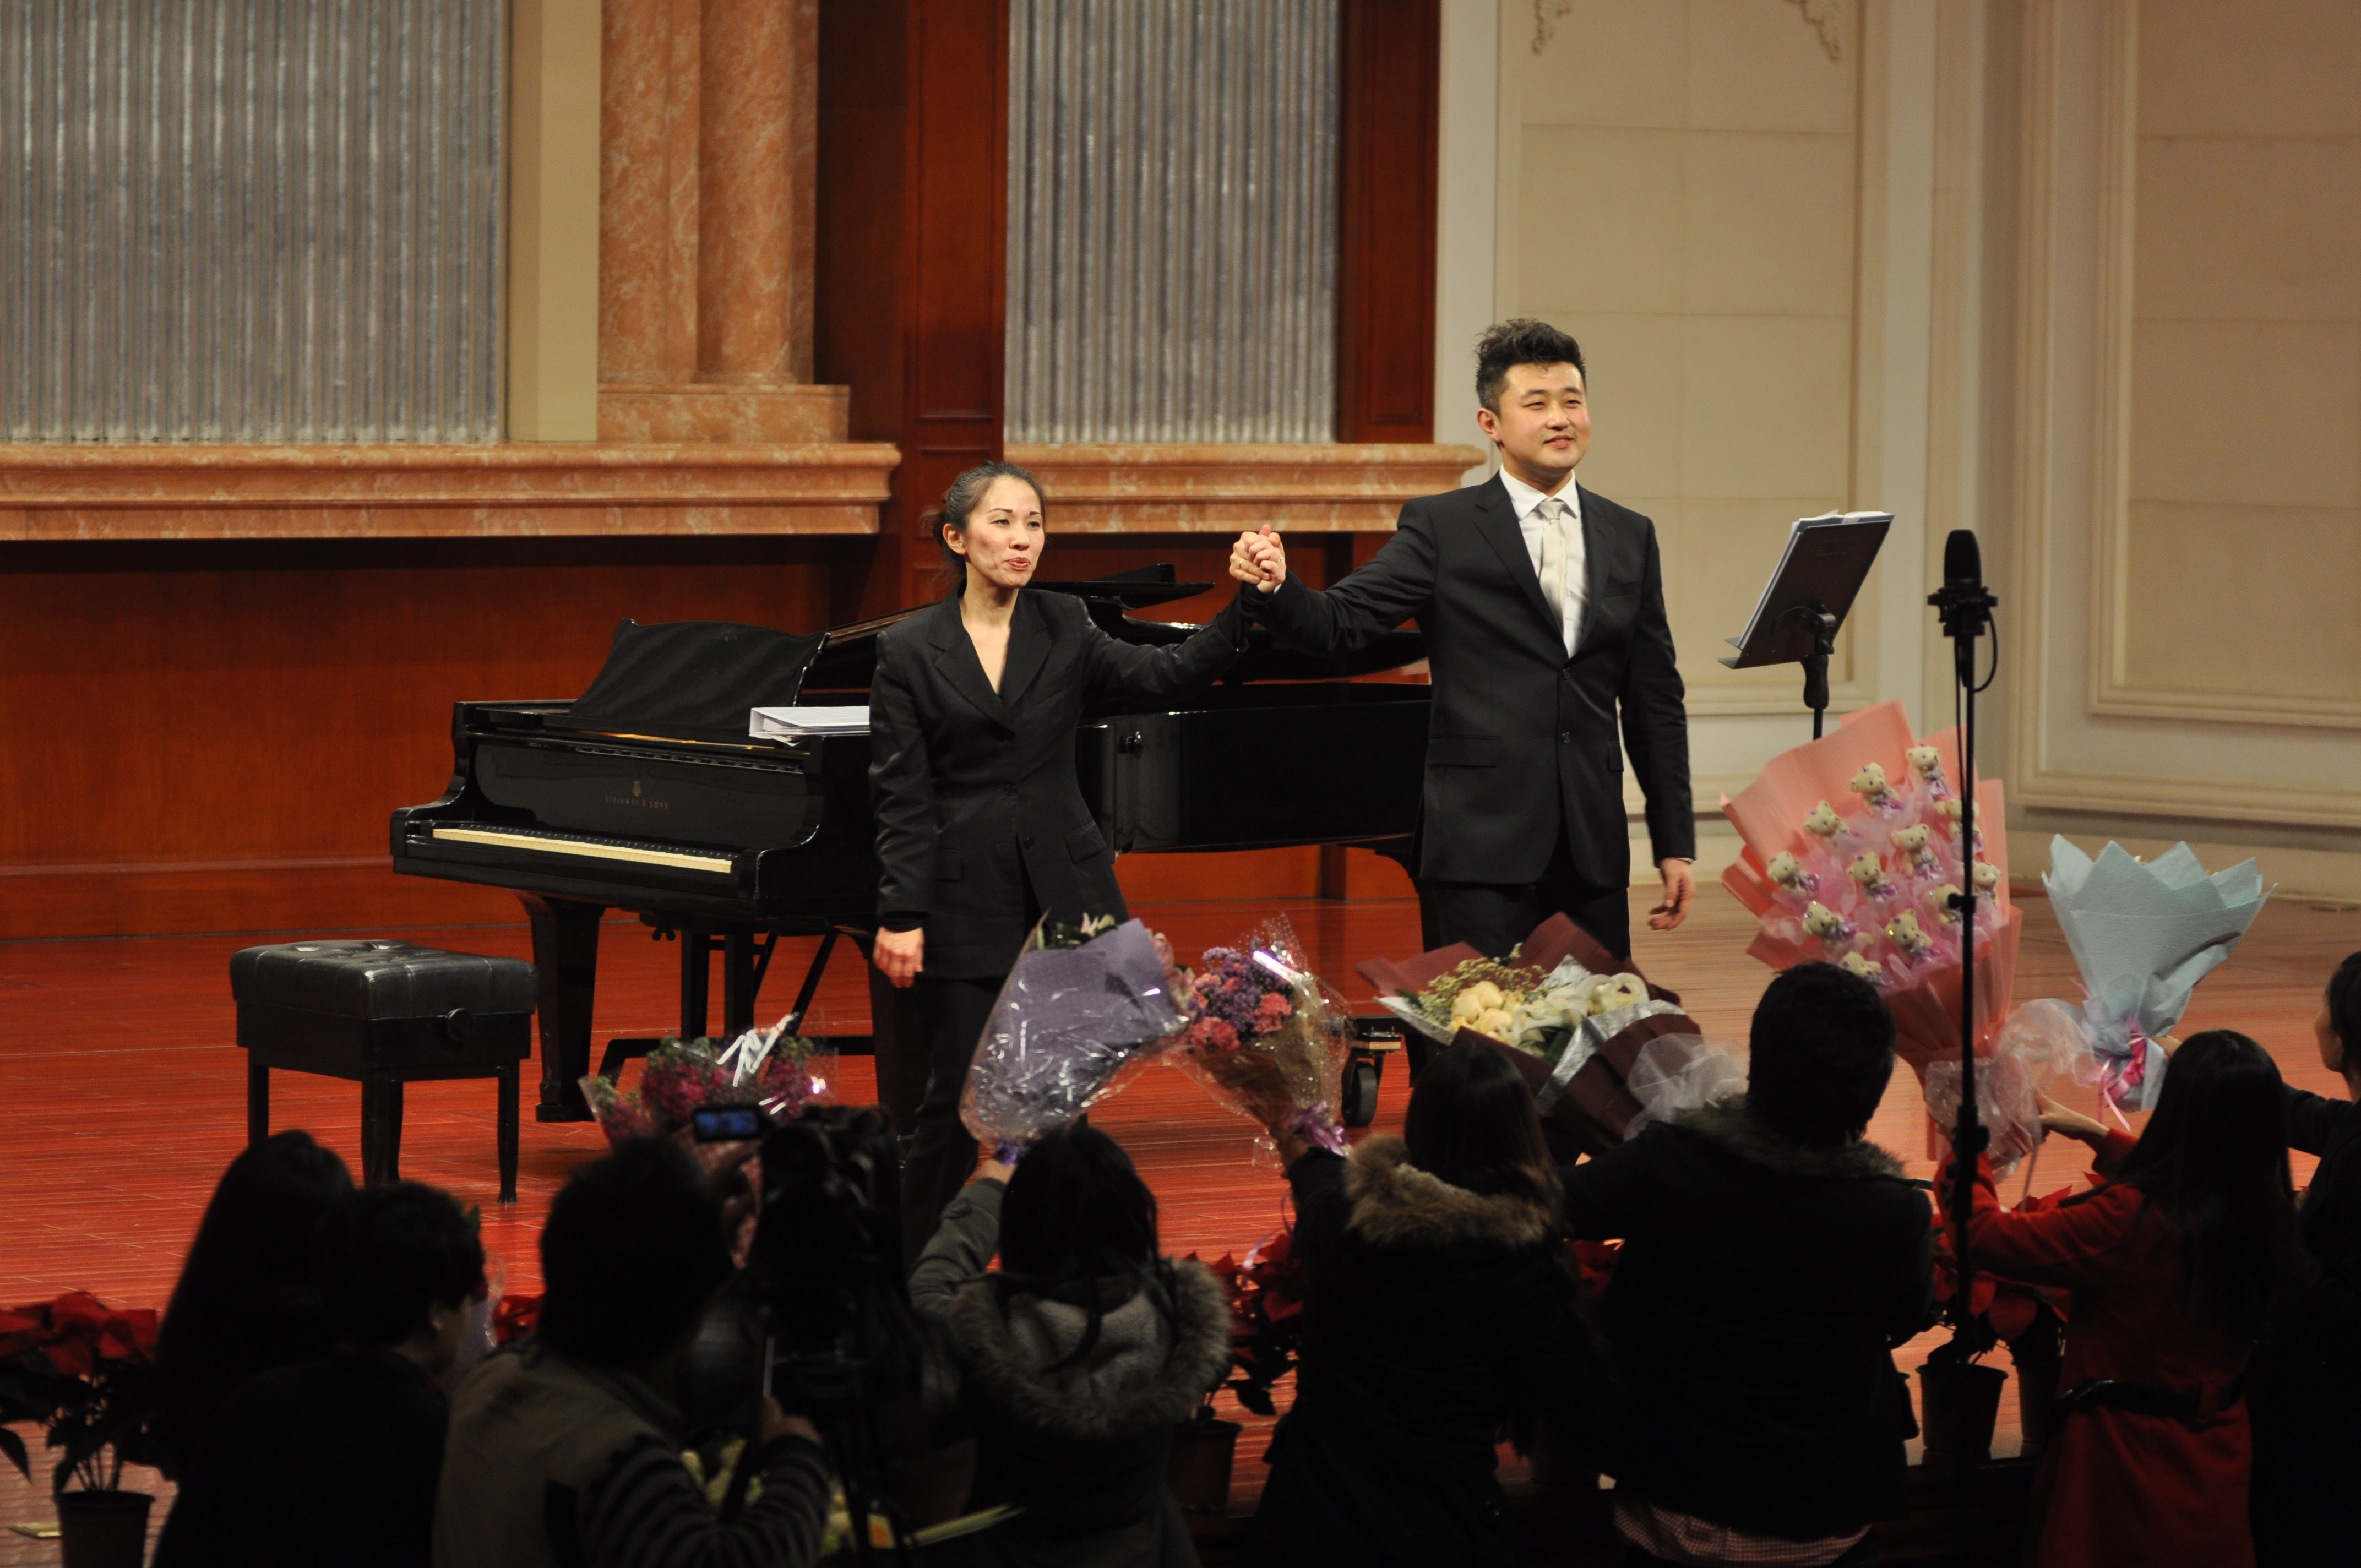 I played for Tenor Yuan Lu’s recital at the Tianjin Concert Hall in December 2013.